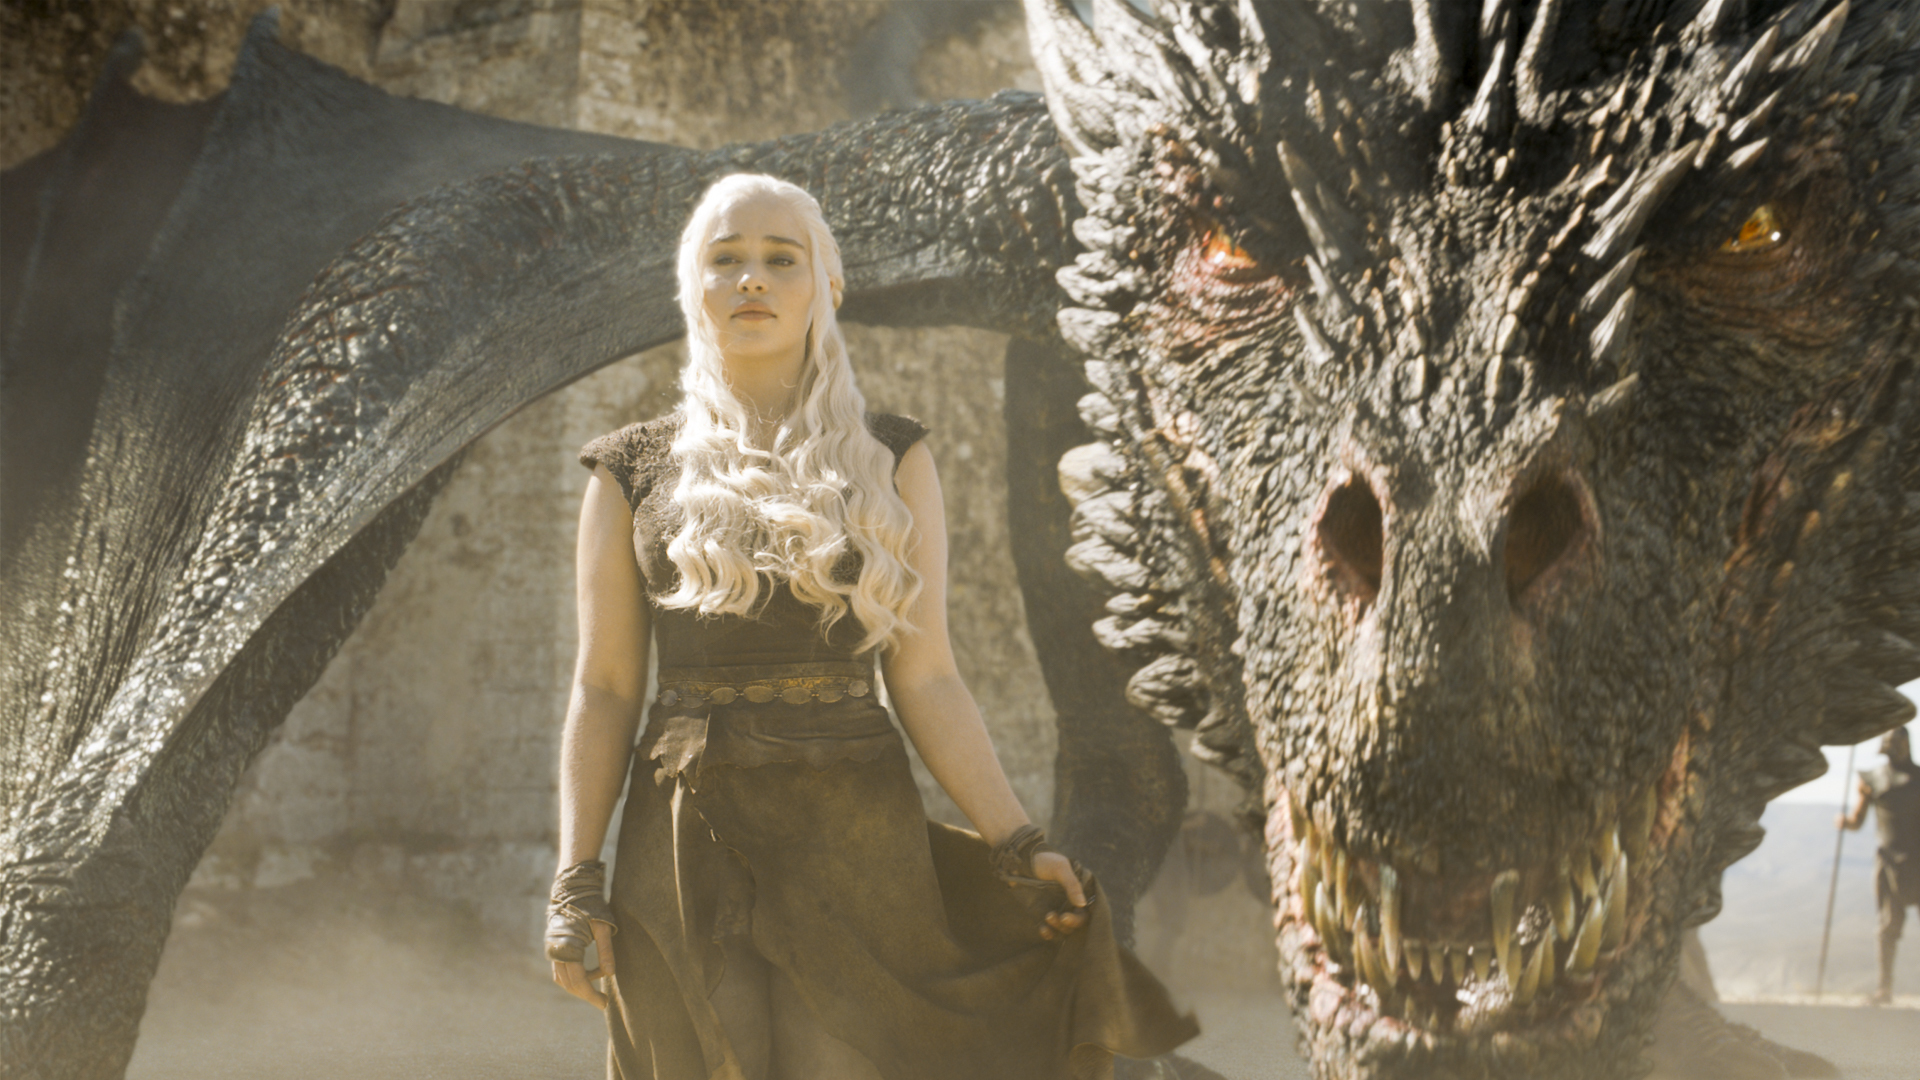 Game of Thrones continued to shock fans